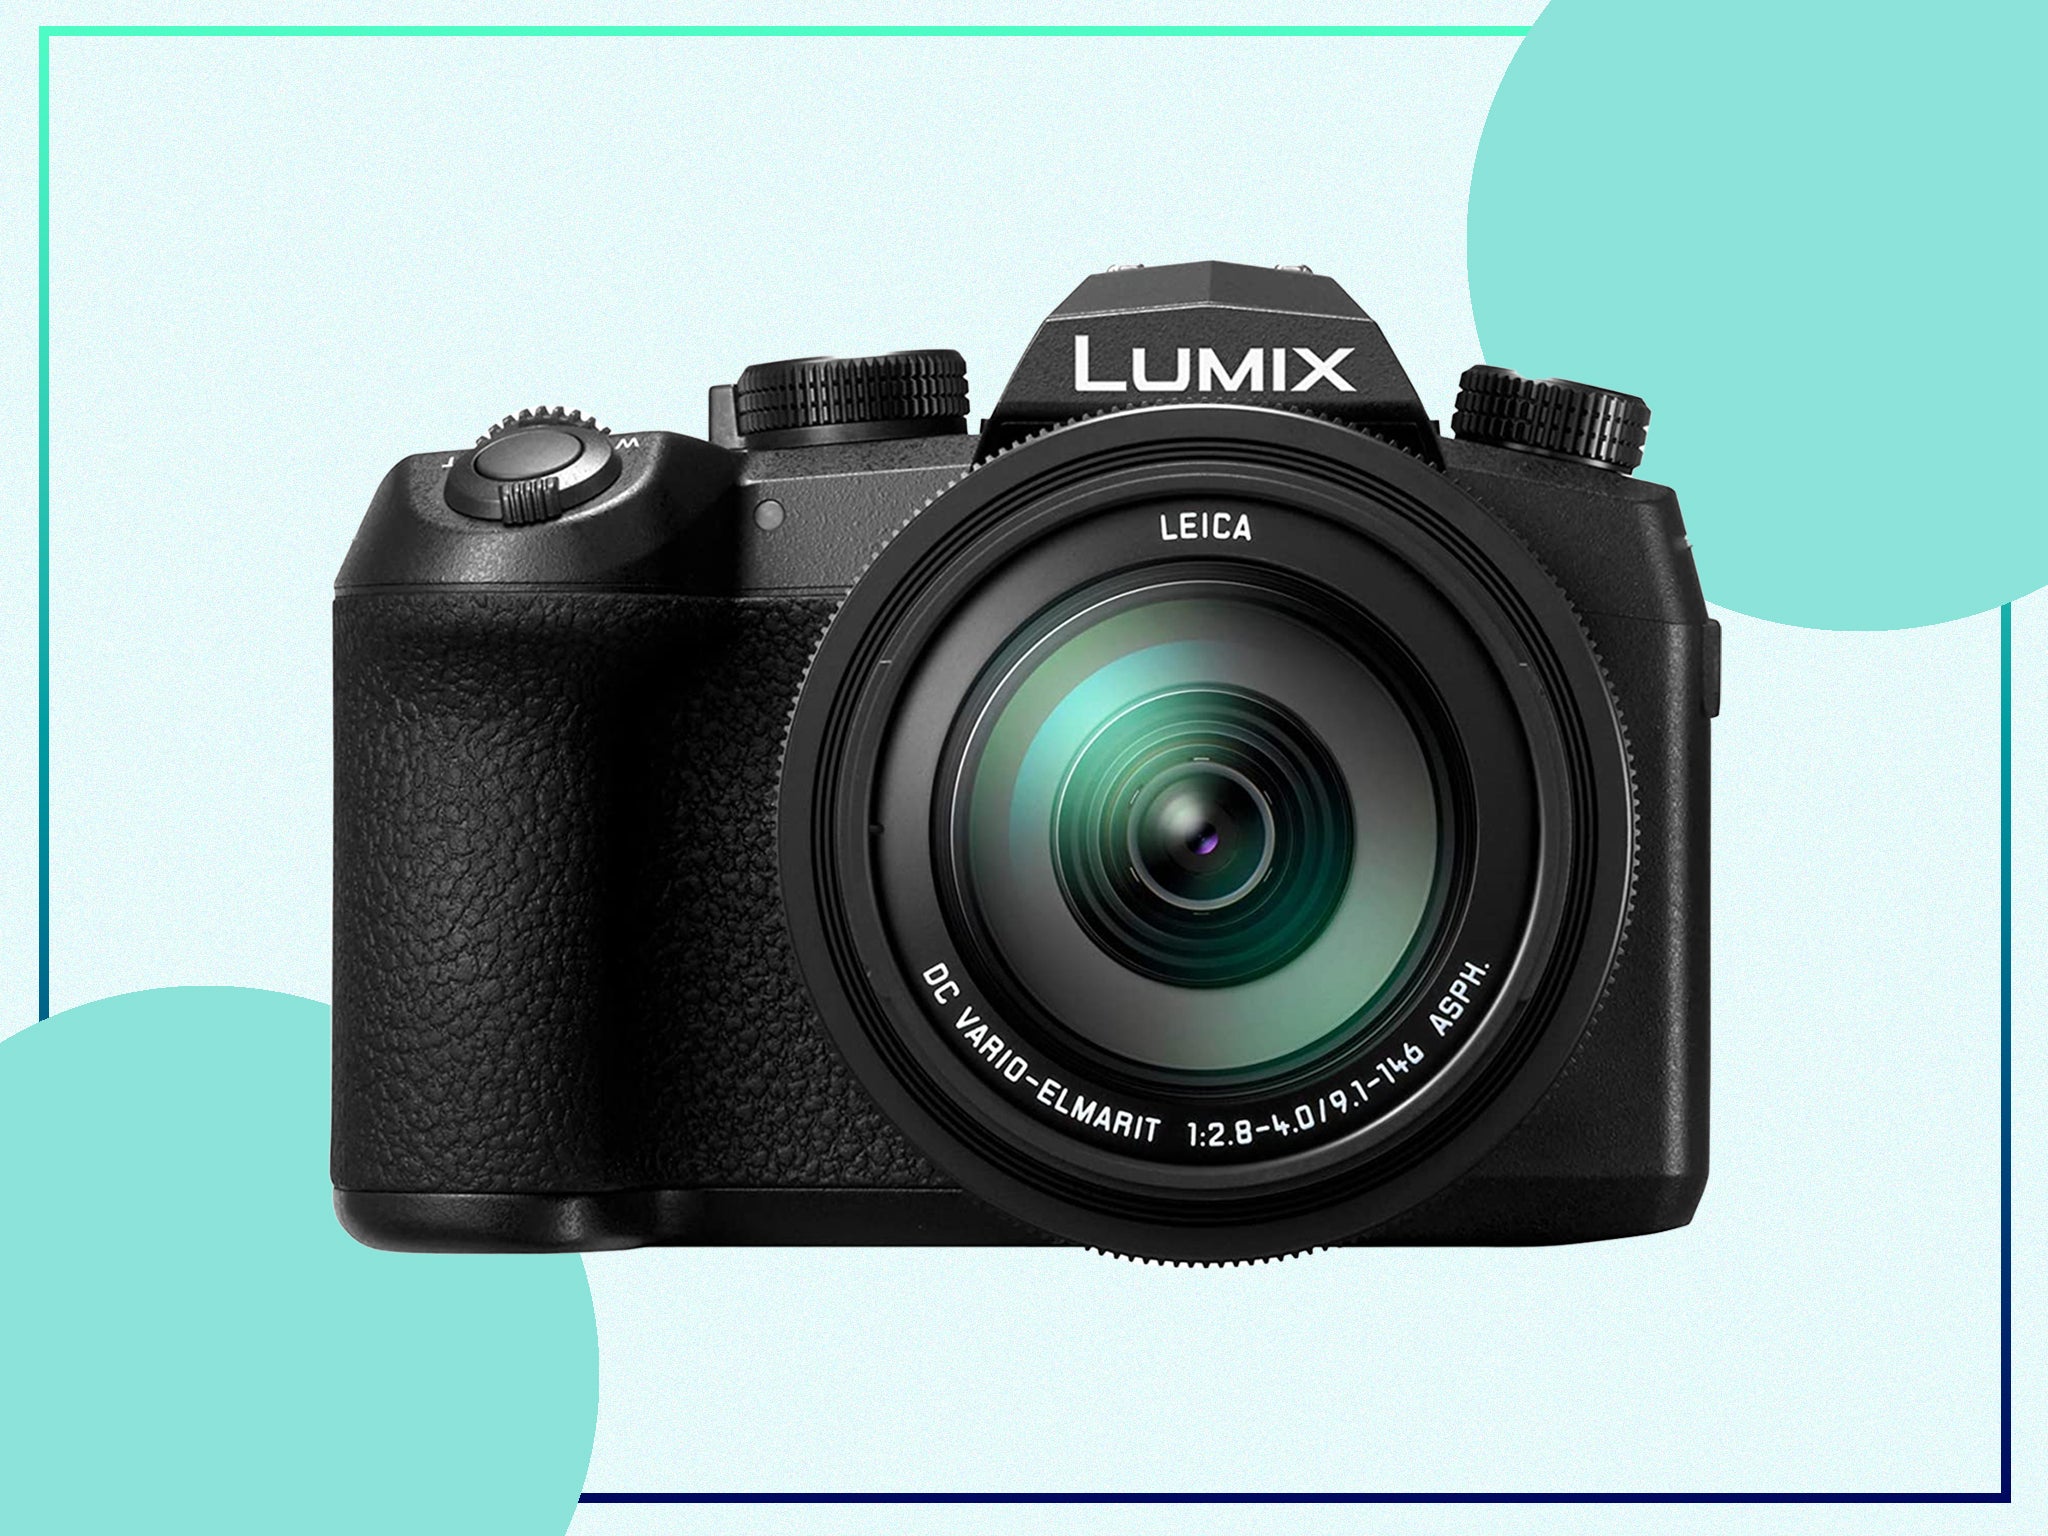 Panasonic lumix dmc fz1000 review An accessible digital camera for stills and video The Independent